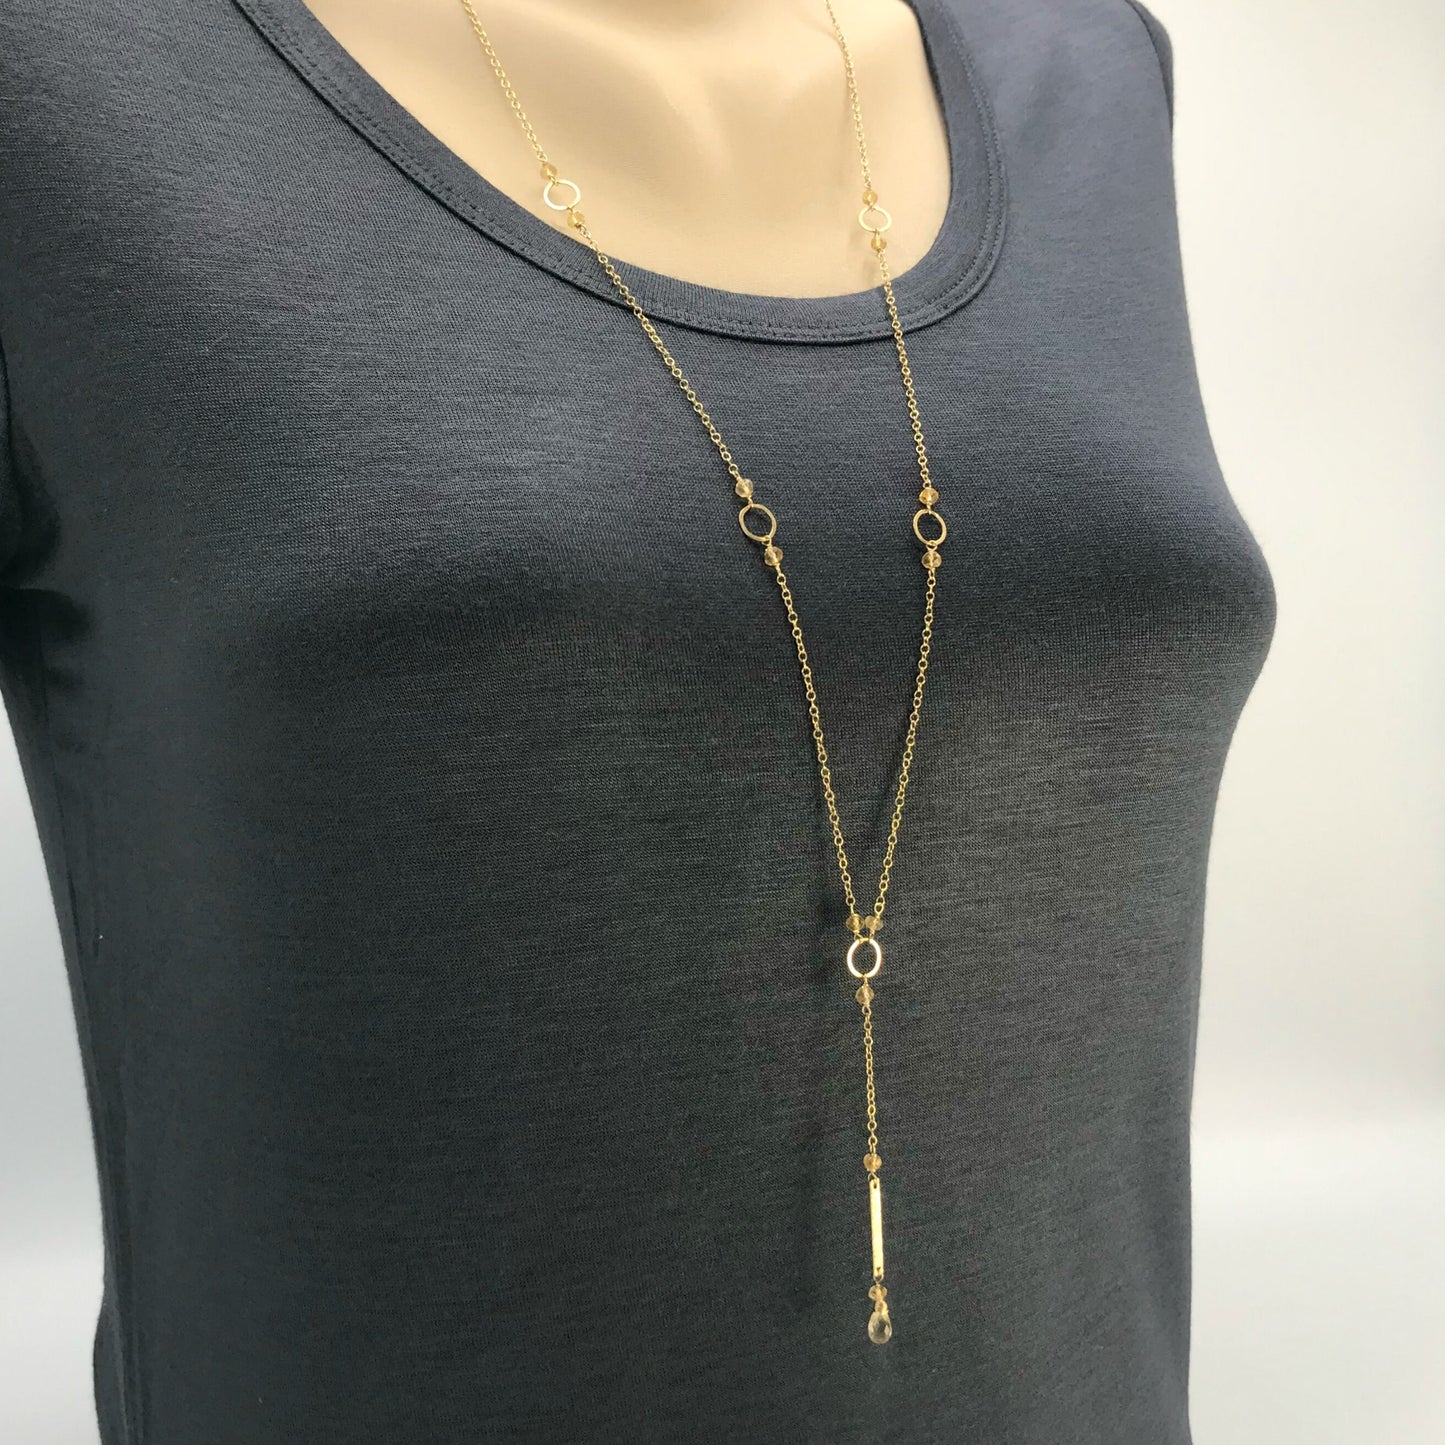 Citrine Y Necklace,November Birthstone,Delicate Gold Lariat,Long Layering Necklace,Dainty Handmade Necklace,Birthday Gift,Drop Necklace